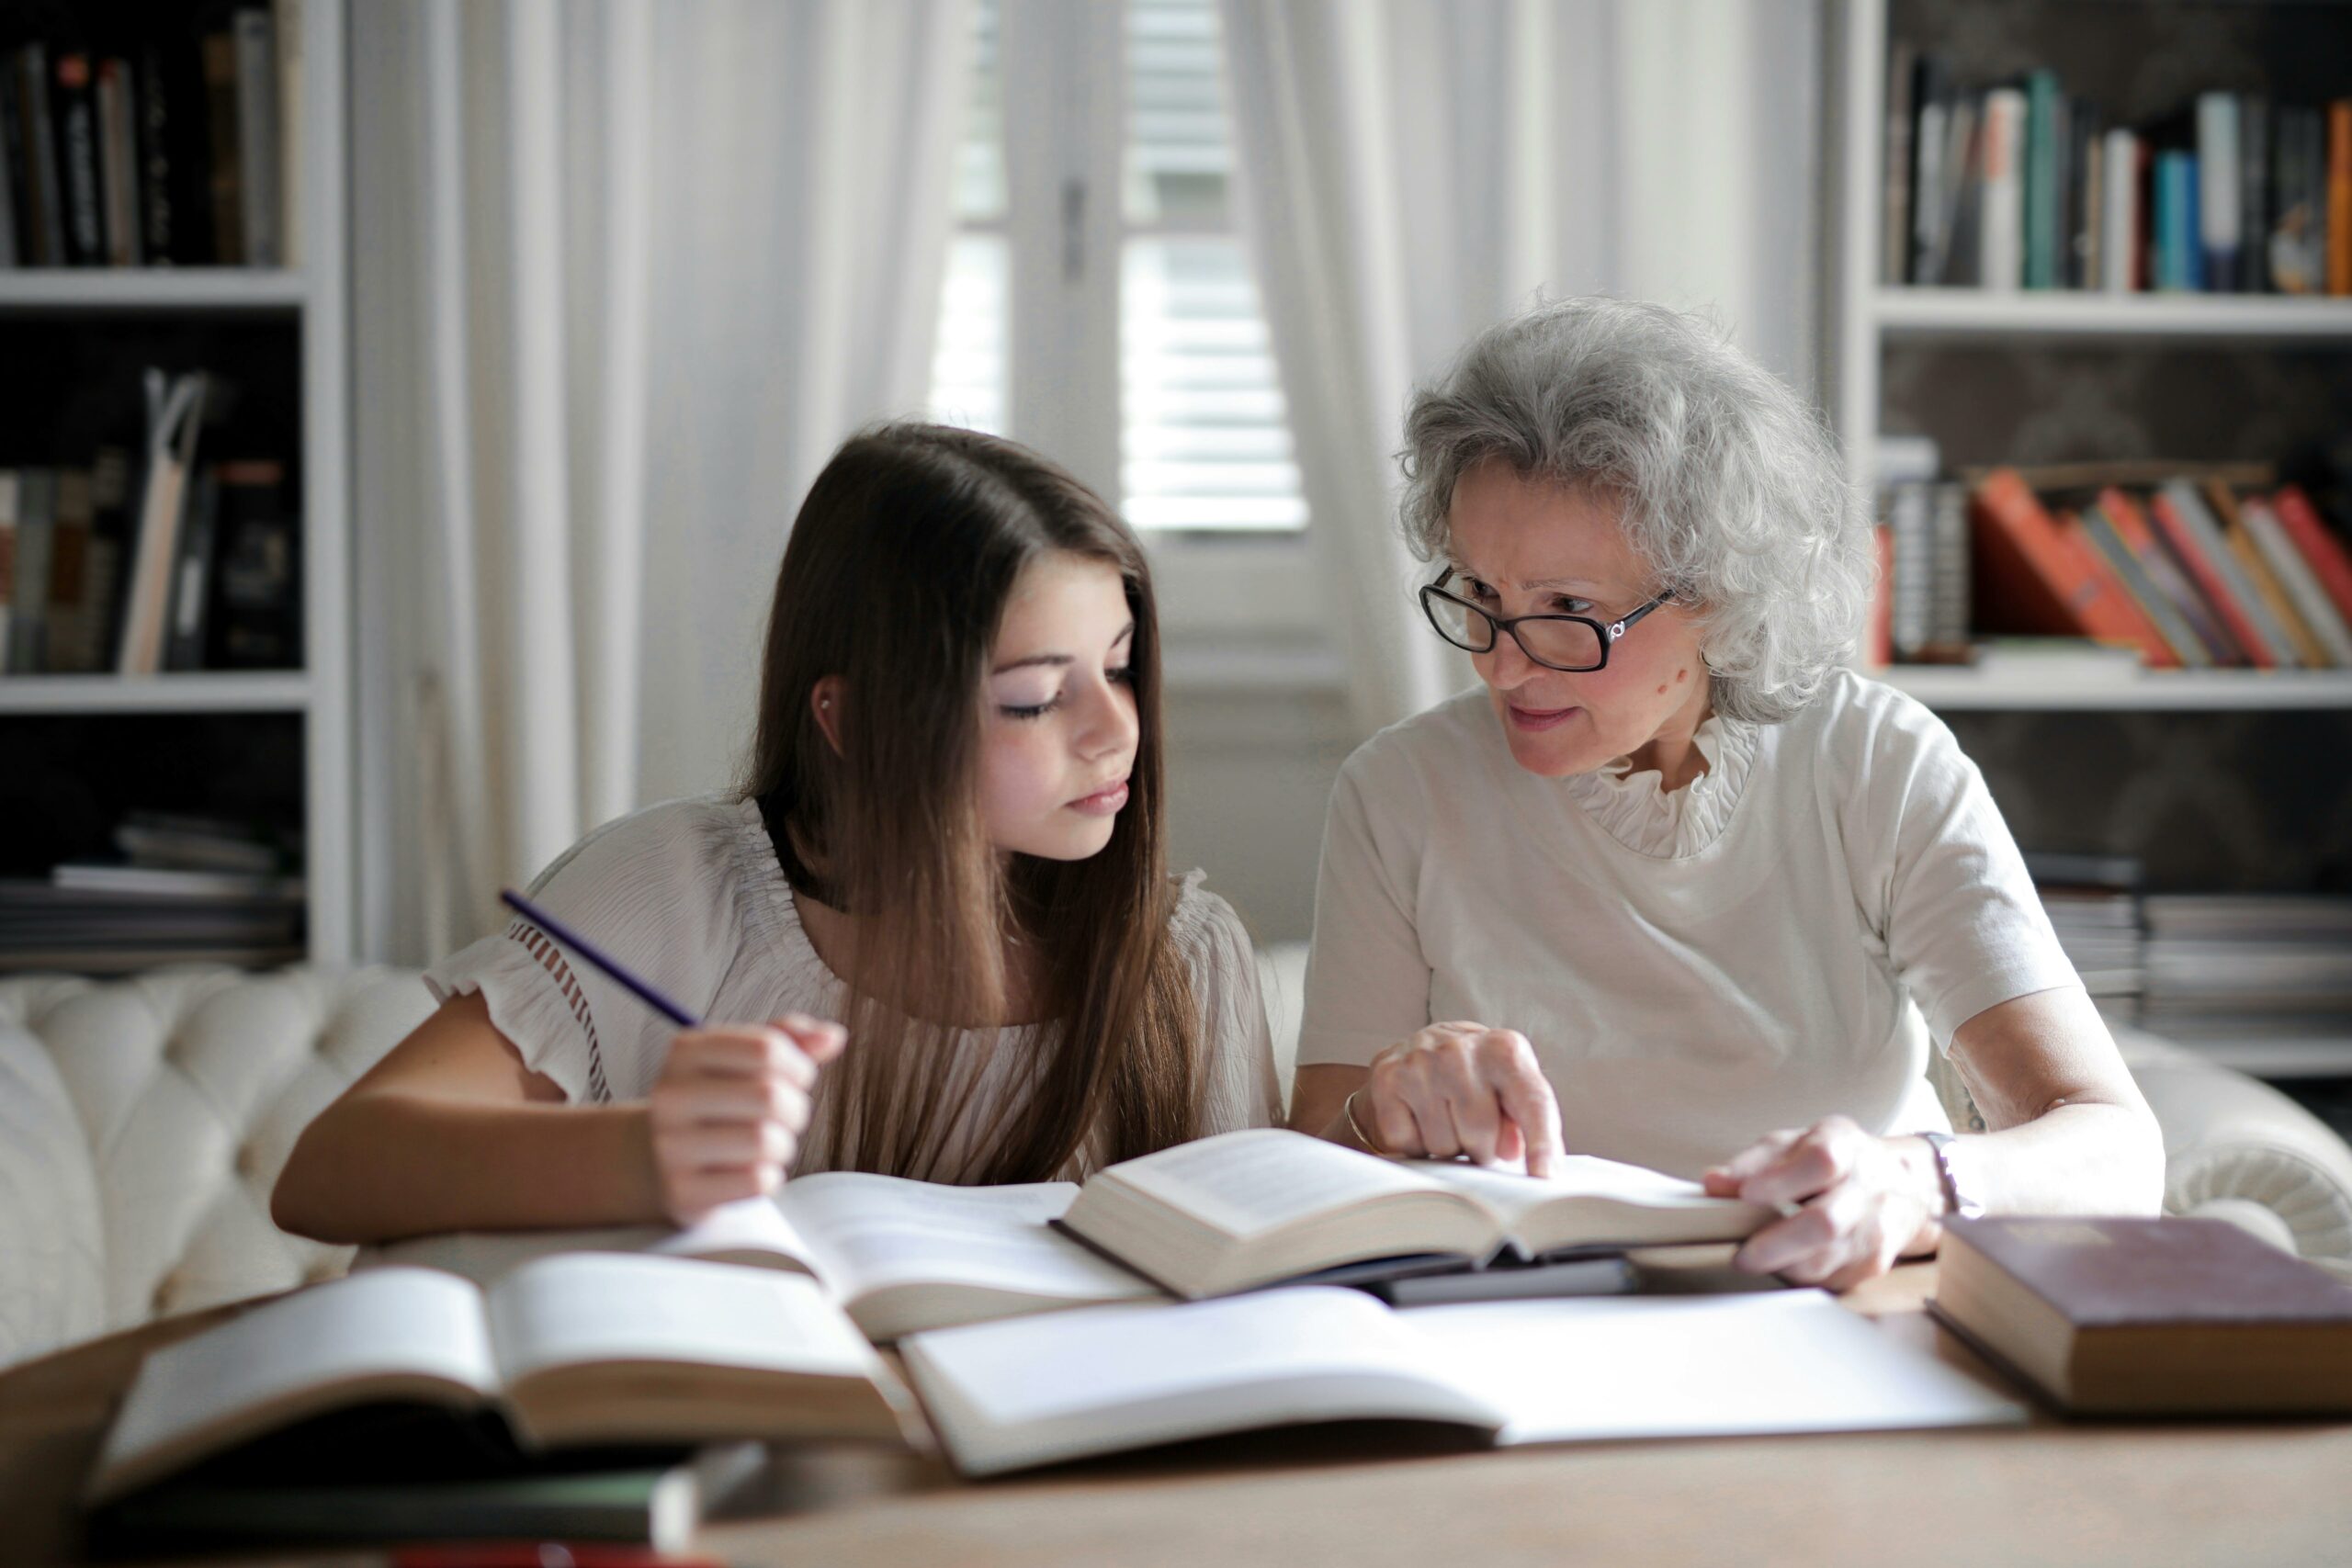 Grandma teaching her younger grand-daughter about finances by pointing to a book.